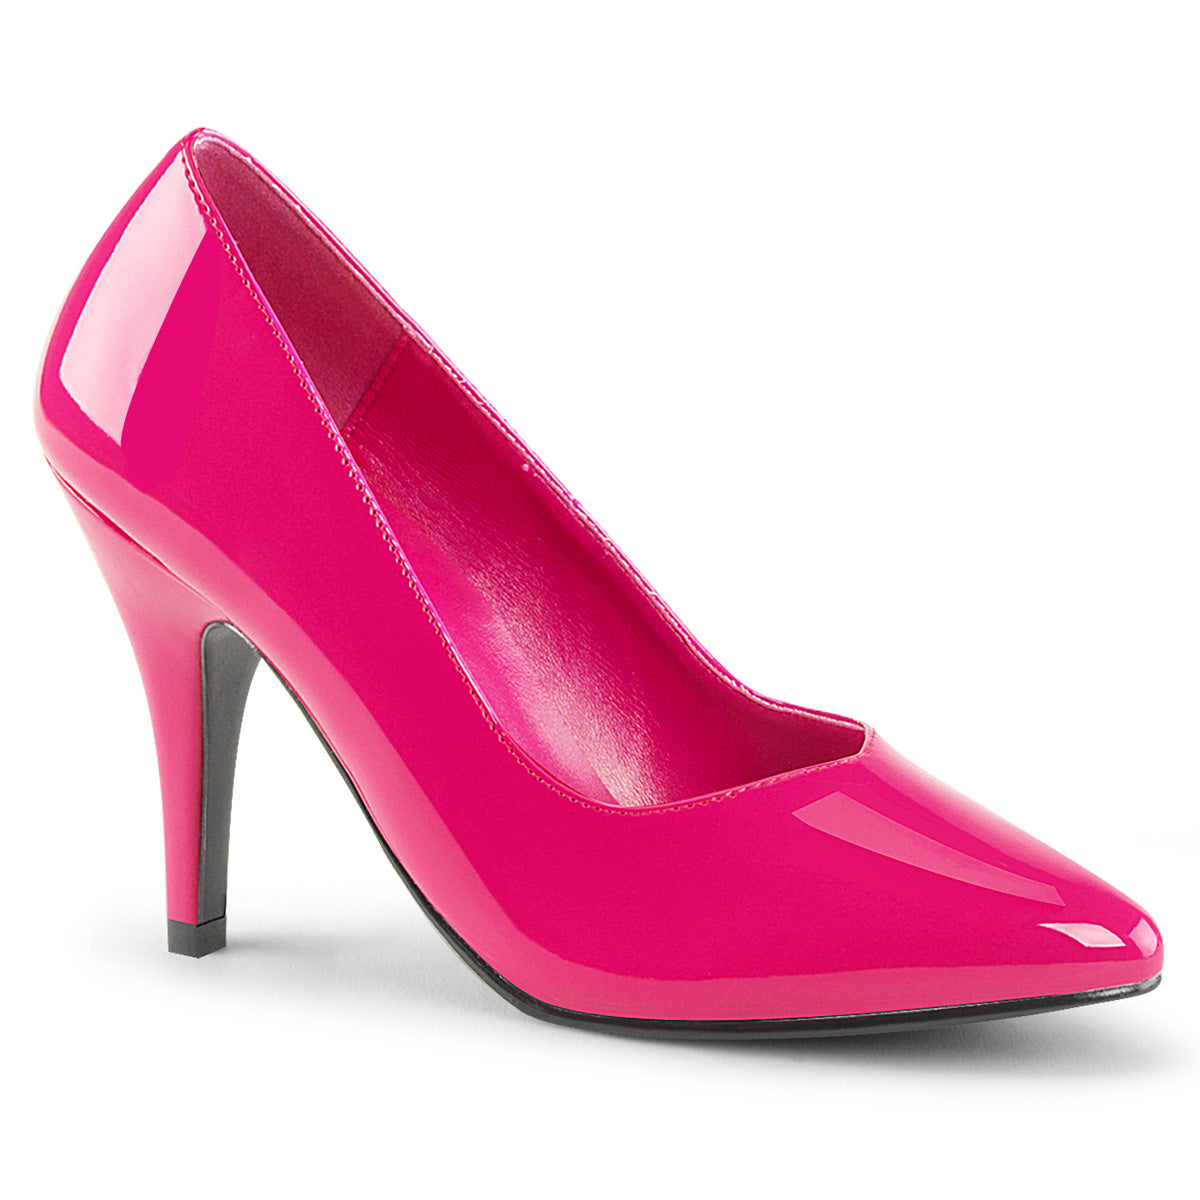 PLEASER DREAM-420 HOT PINK 4 INCH HIGH HEEL SINGLE SOLE SHOES SIZE 12 SALE